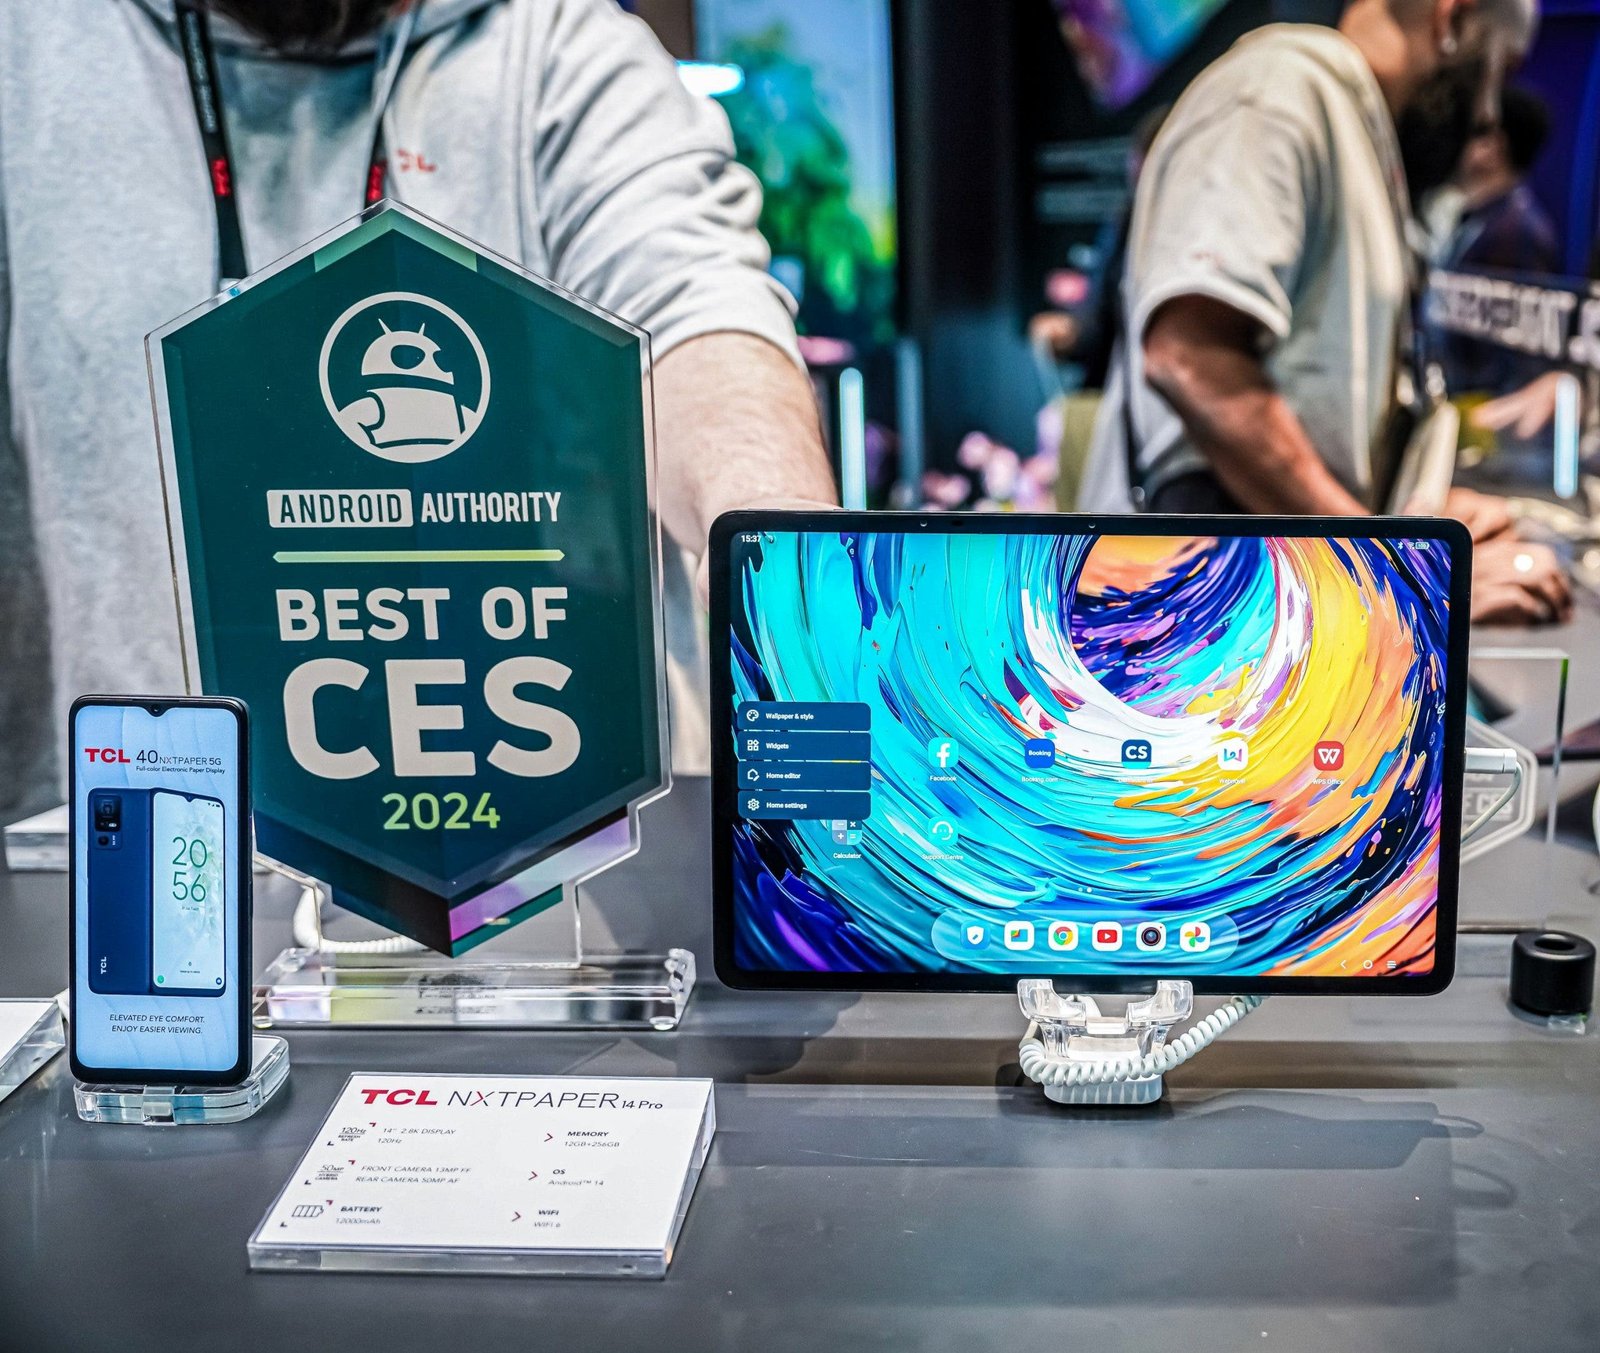 TCL Honored with Over 40 Awards and Accolades for 115-inch TV and Other Innovative Products Across Categories at CES 2024